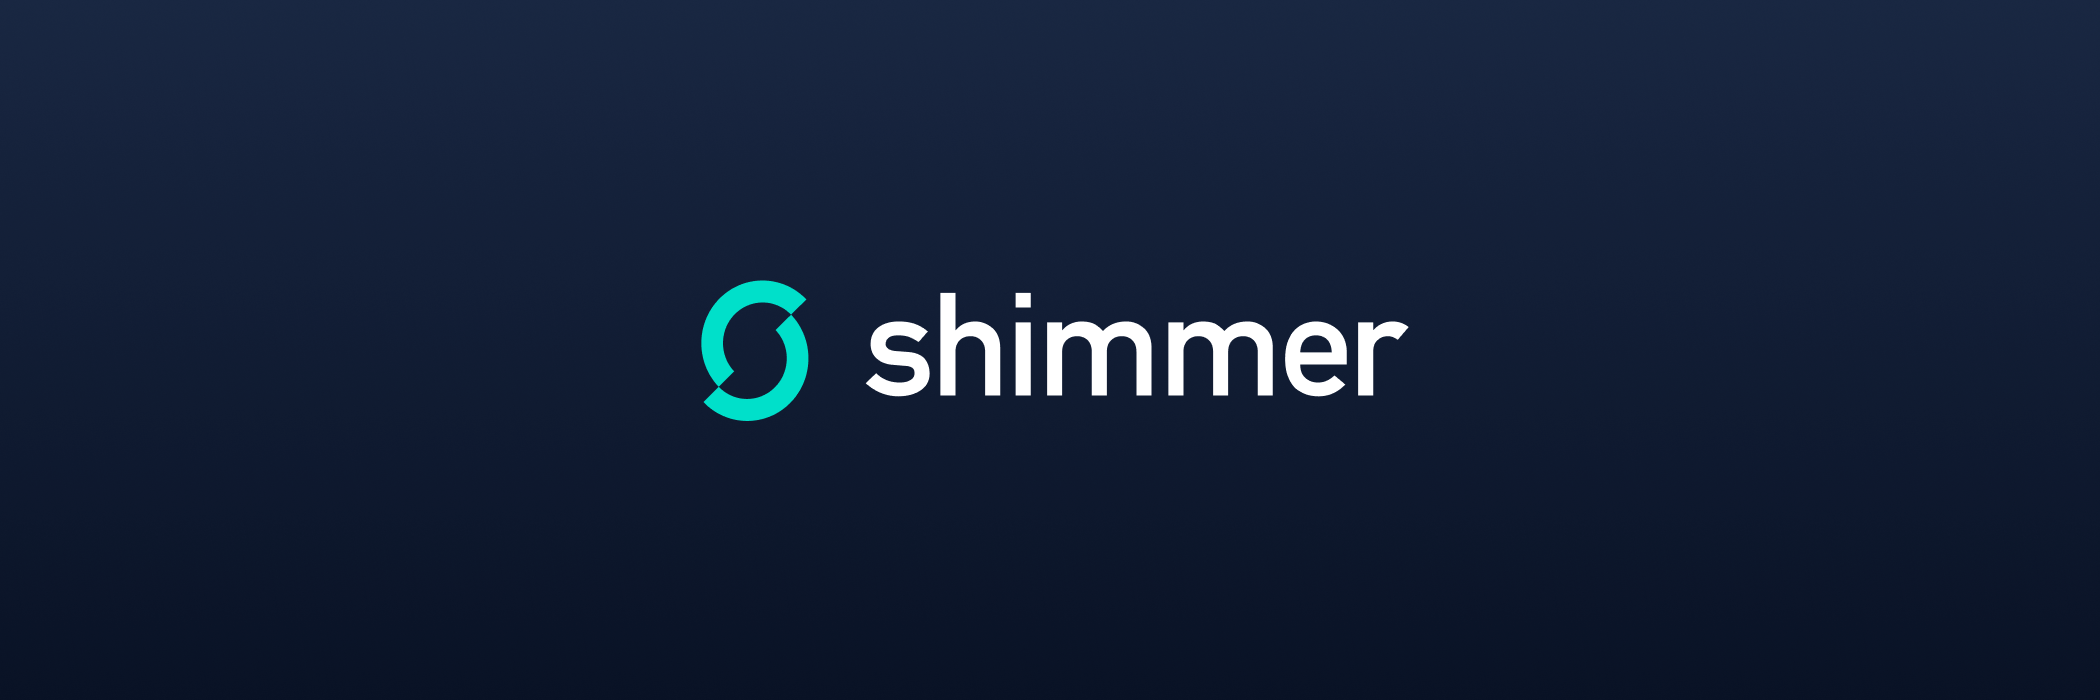 IOTA, Shimmer and Assembly Staking Roadmap